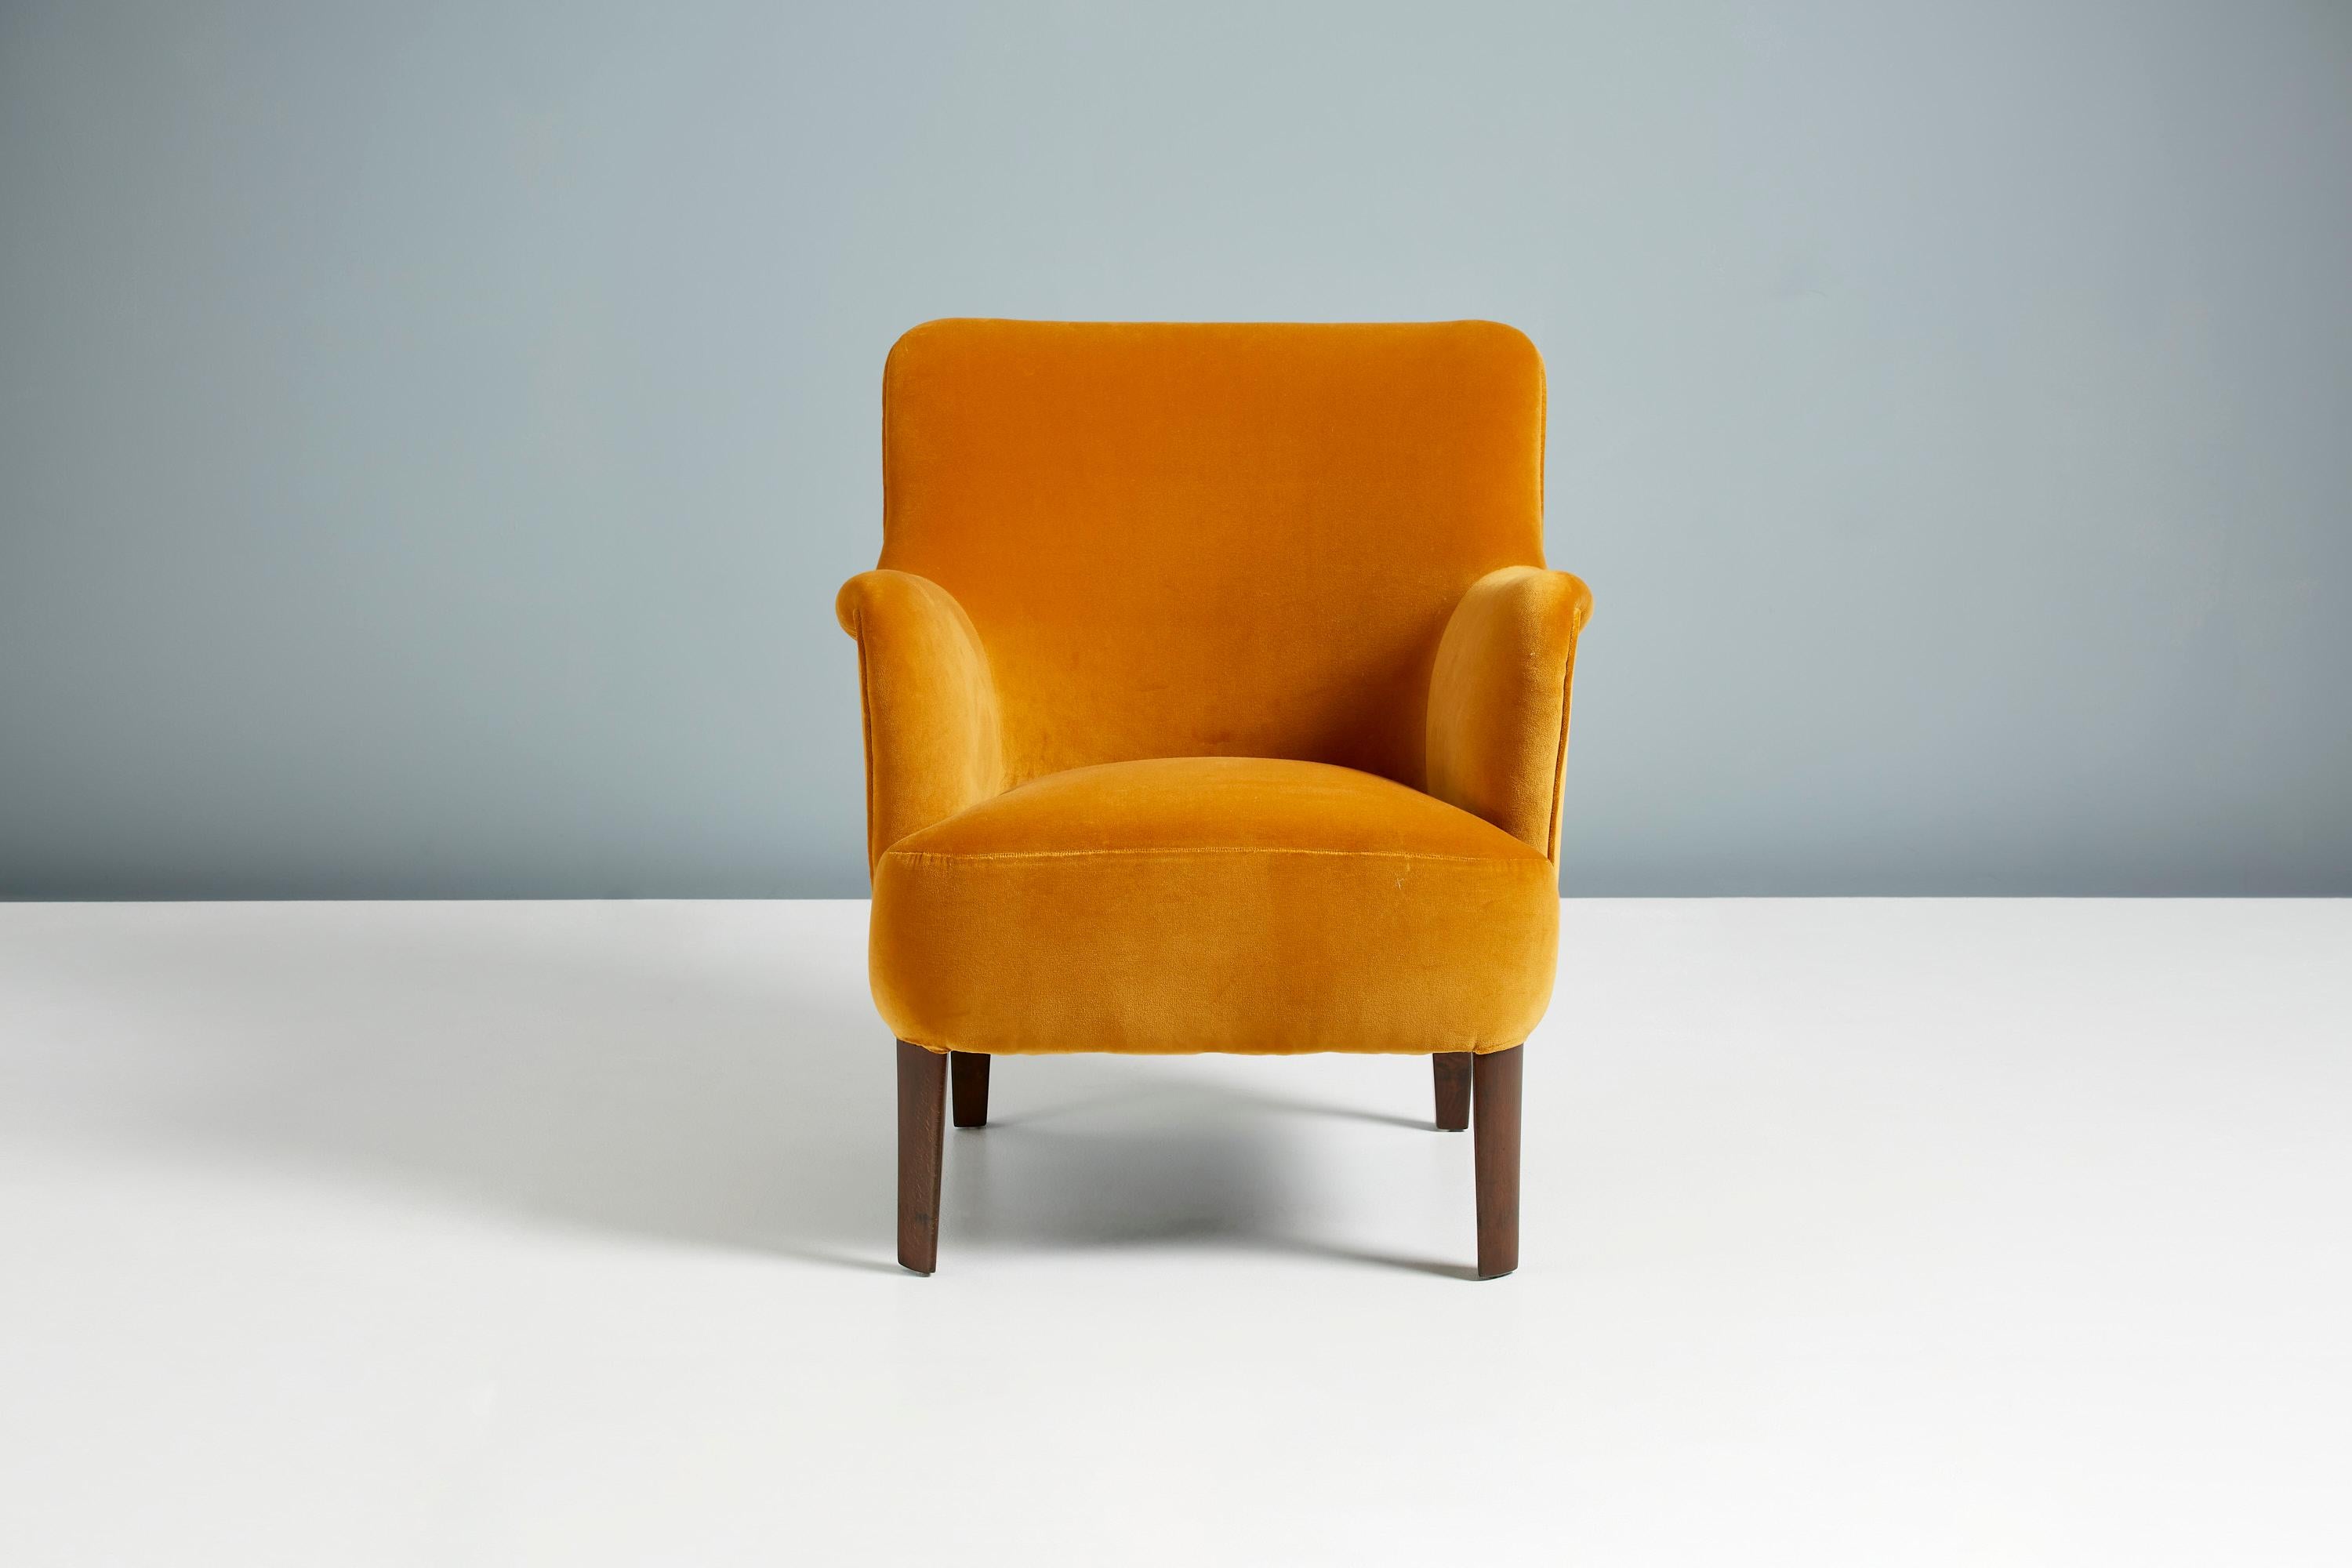 Peter Hvidt

Model 1748 lounge chair, circa 1940s

This elegant low-back lounge chair was produced by Fritz Hansen in Denmark in the late 1940s by master-designer Peter Hvidt. The beech legs have been walnut-stained and has been completely